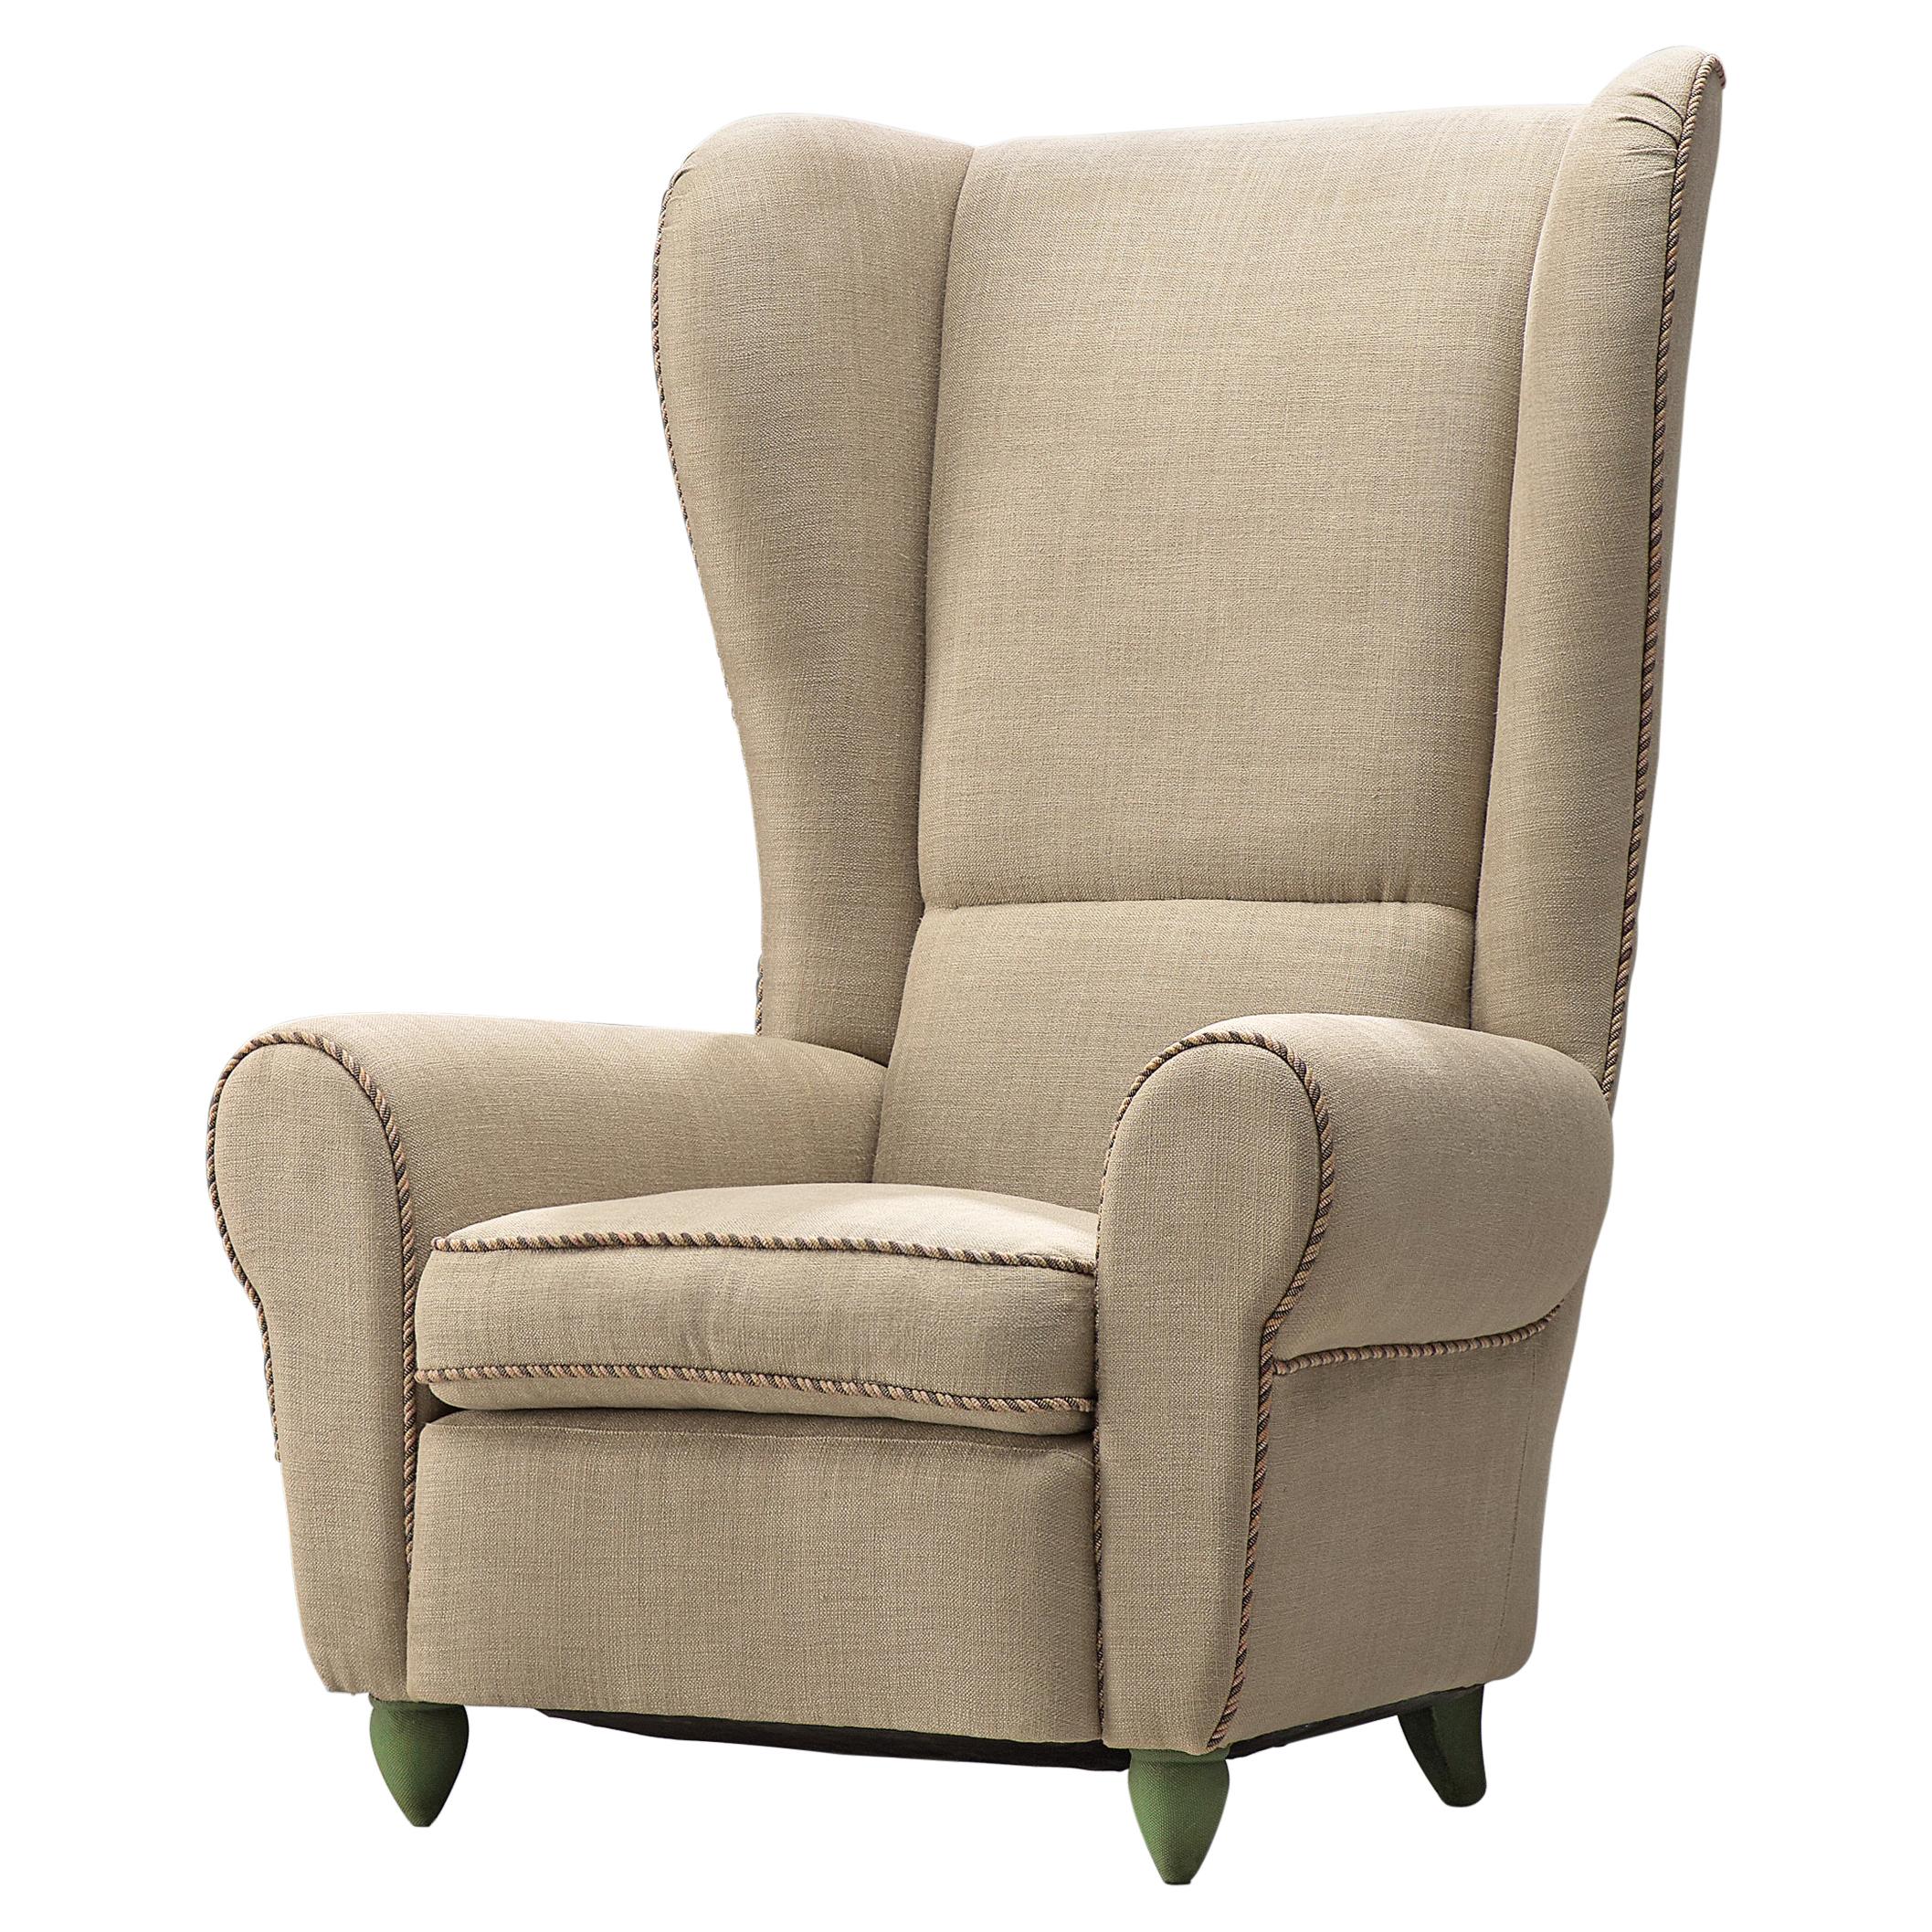 Guglielmo Ulrich Reupholstered Grand Wingback Chair in Natural Cream Upholstery